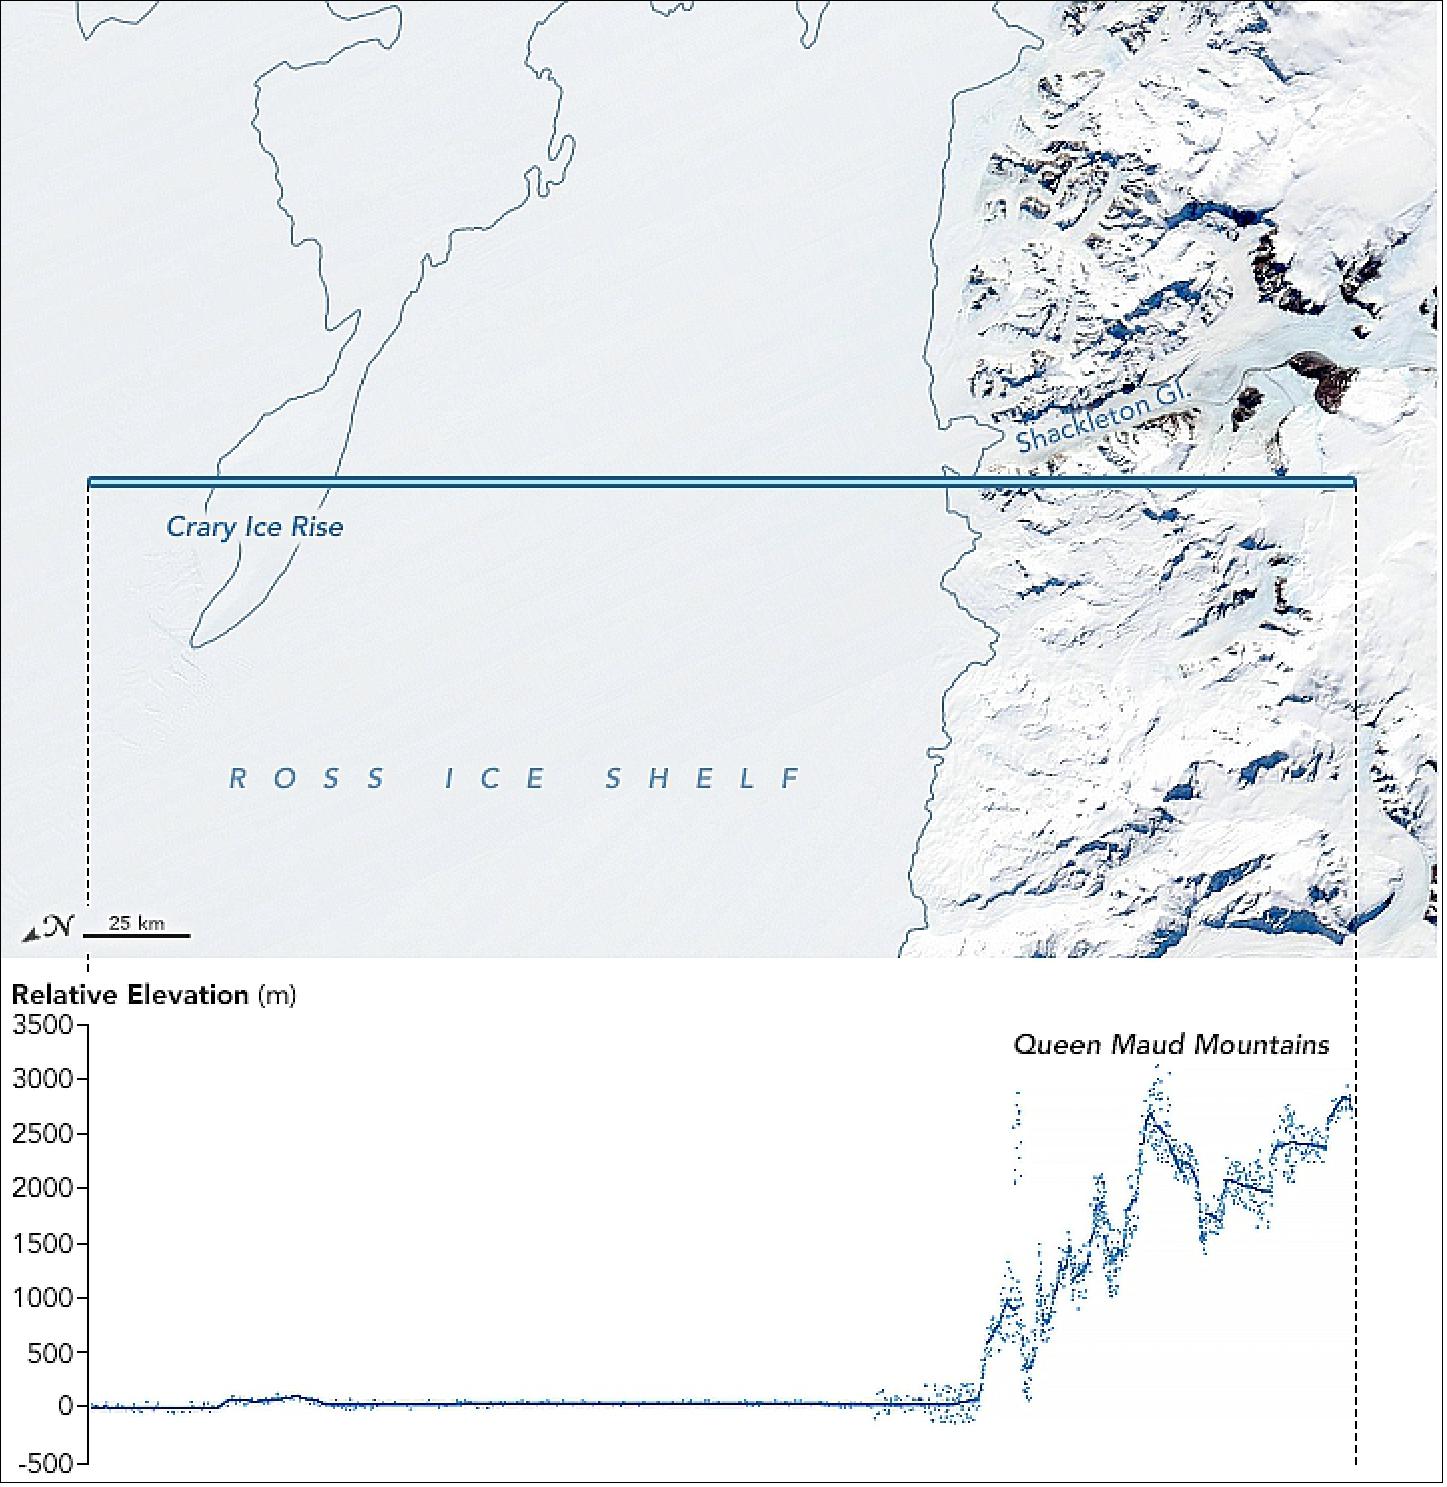 Figure 51: New elevation measurements of the ATLAS instrument on ICESat-2 span the continent’s icy surfaces, from the flat Ross Ice Shelf to the rugged Transantarctic Mountains (image credit: NASA Earth Observatory, image by Joshua Stevens, using ICESat-2 data courtesy of Kaitlin Harbeck, NASA/GSFC, story by Kathryn Hansen)